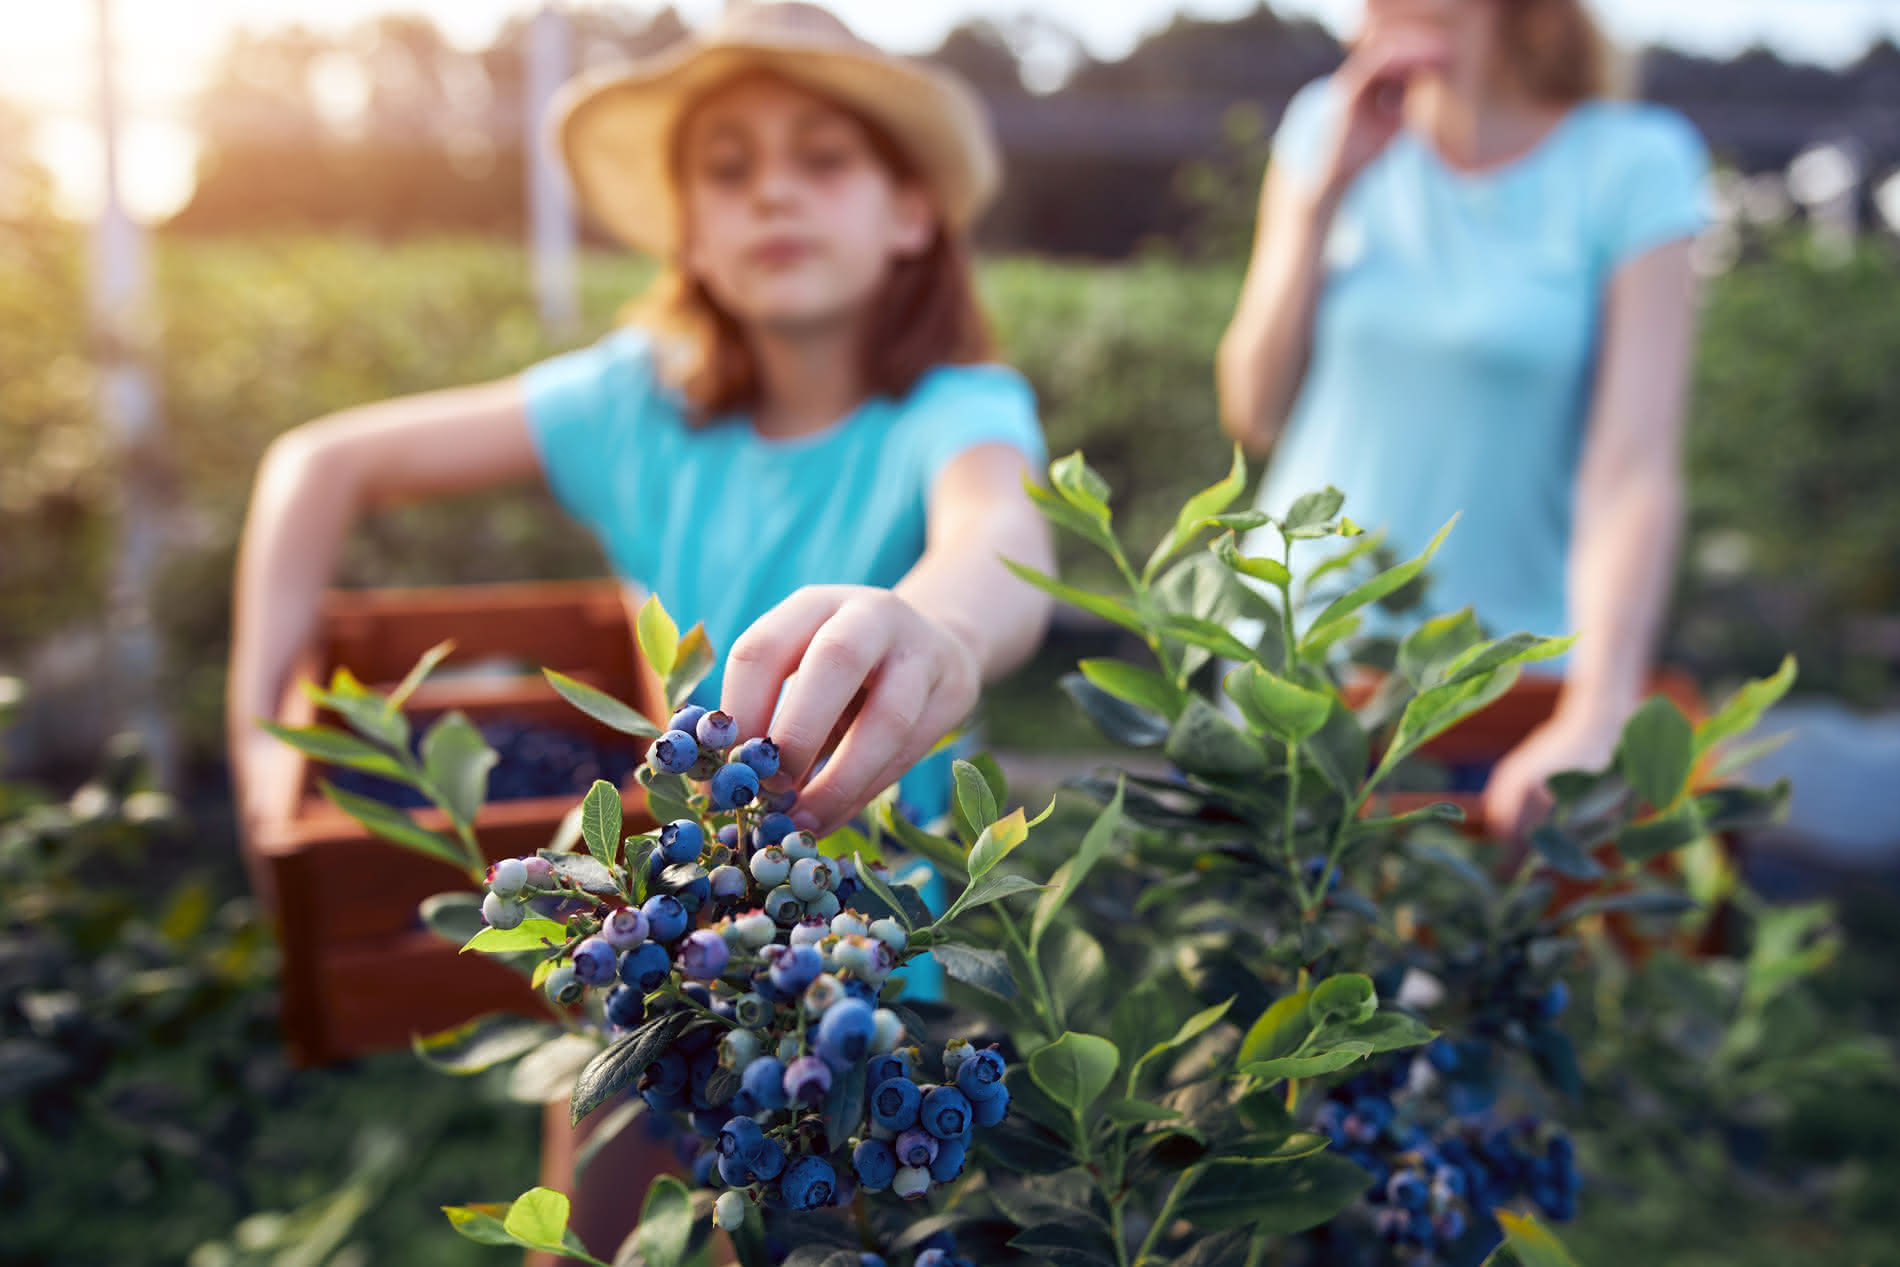 A child picking blueberries from a blueberry bush.